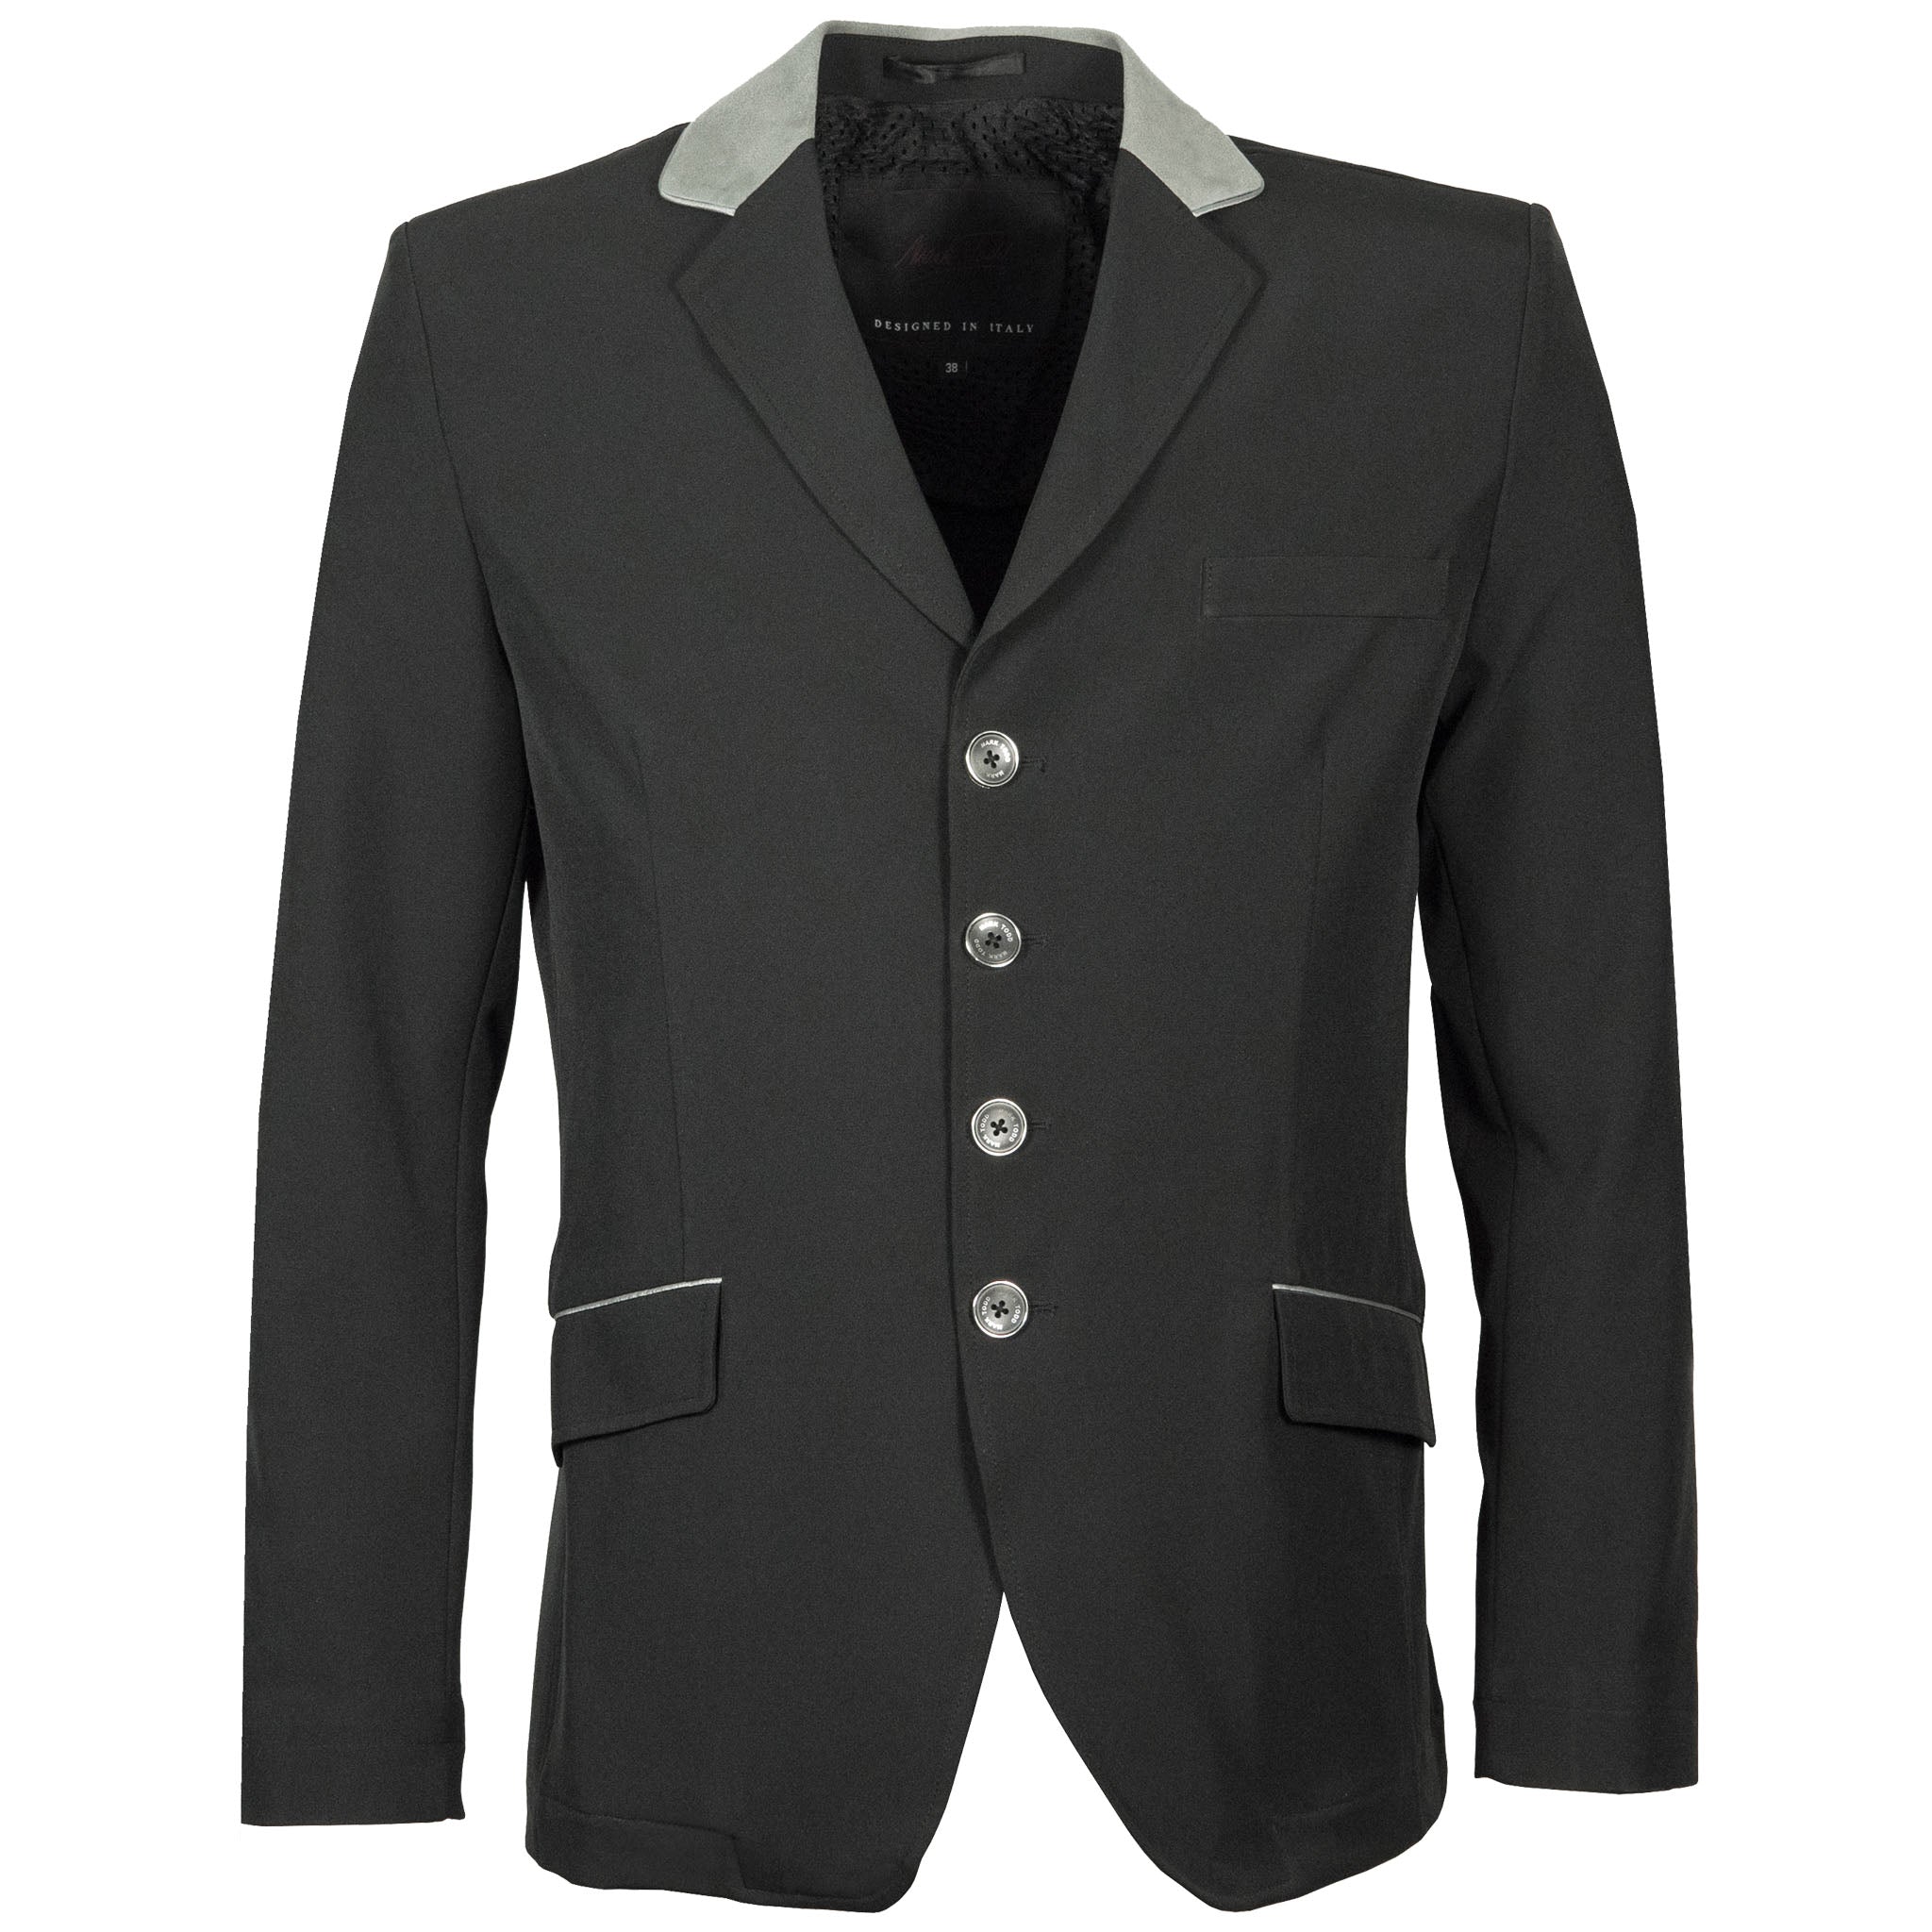 Mark Todd Men's Softshell Tailored Sport Show Jacket - Male Equestrian